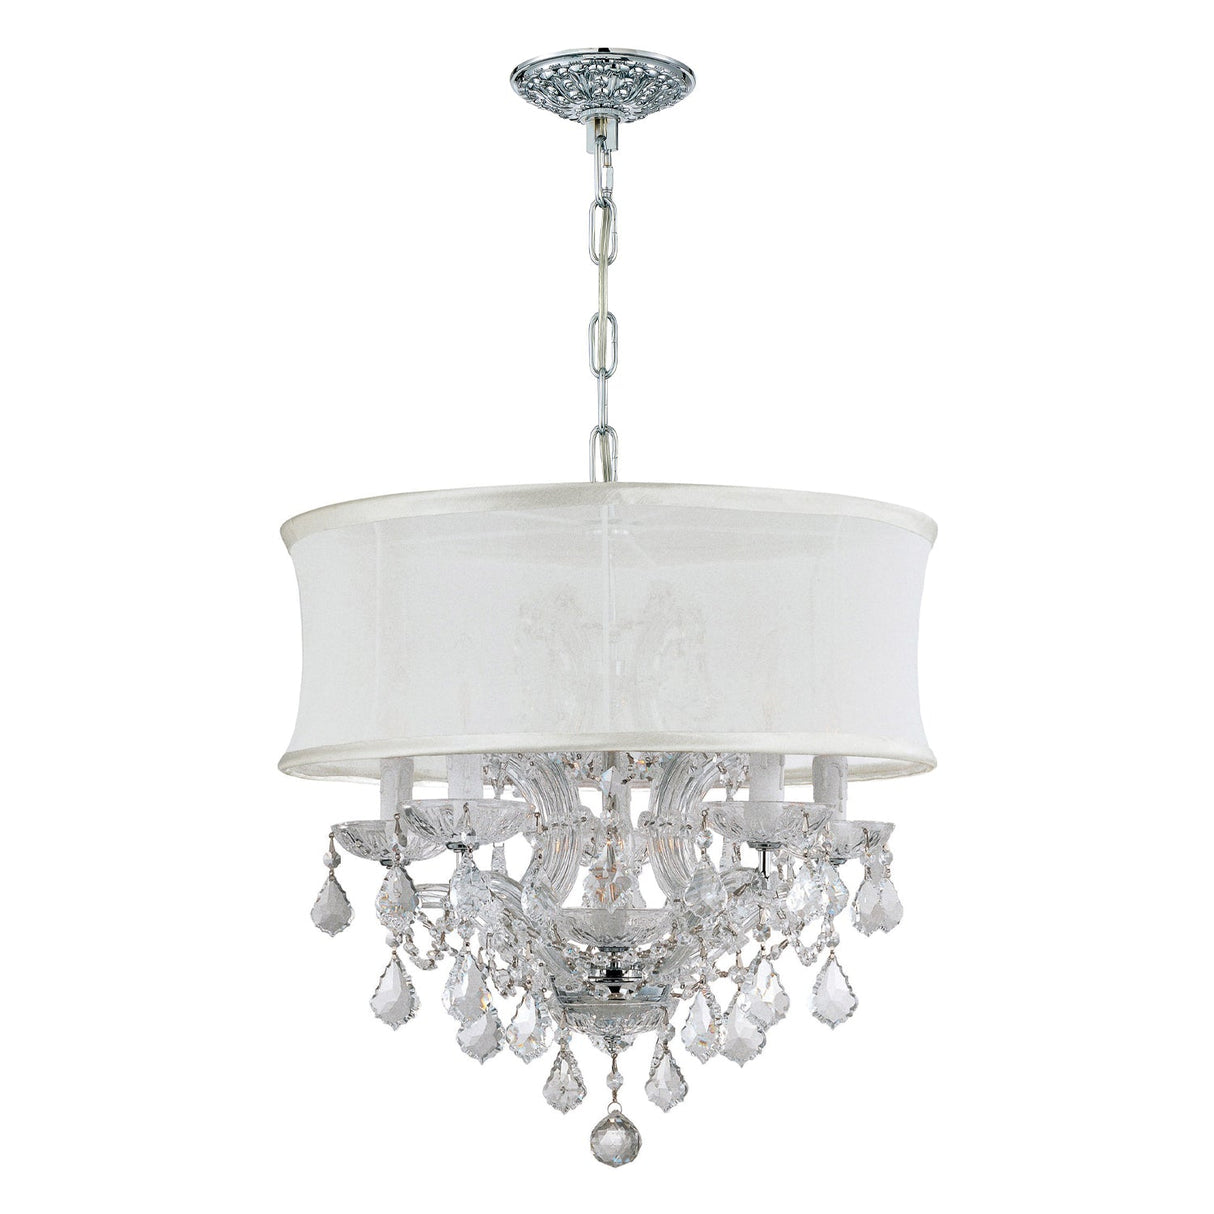 Brentwood 6 Light Crystal Polished Chrome Drum Shade Chandelier 4415-CH-SMW-CLM